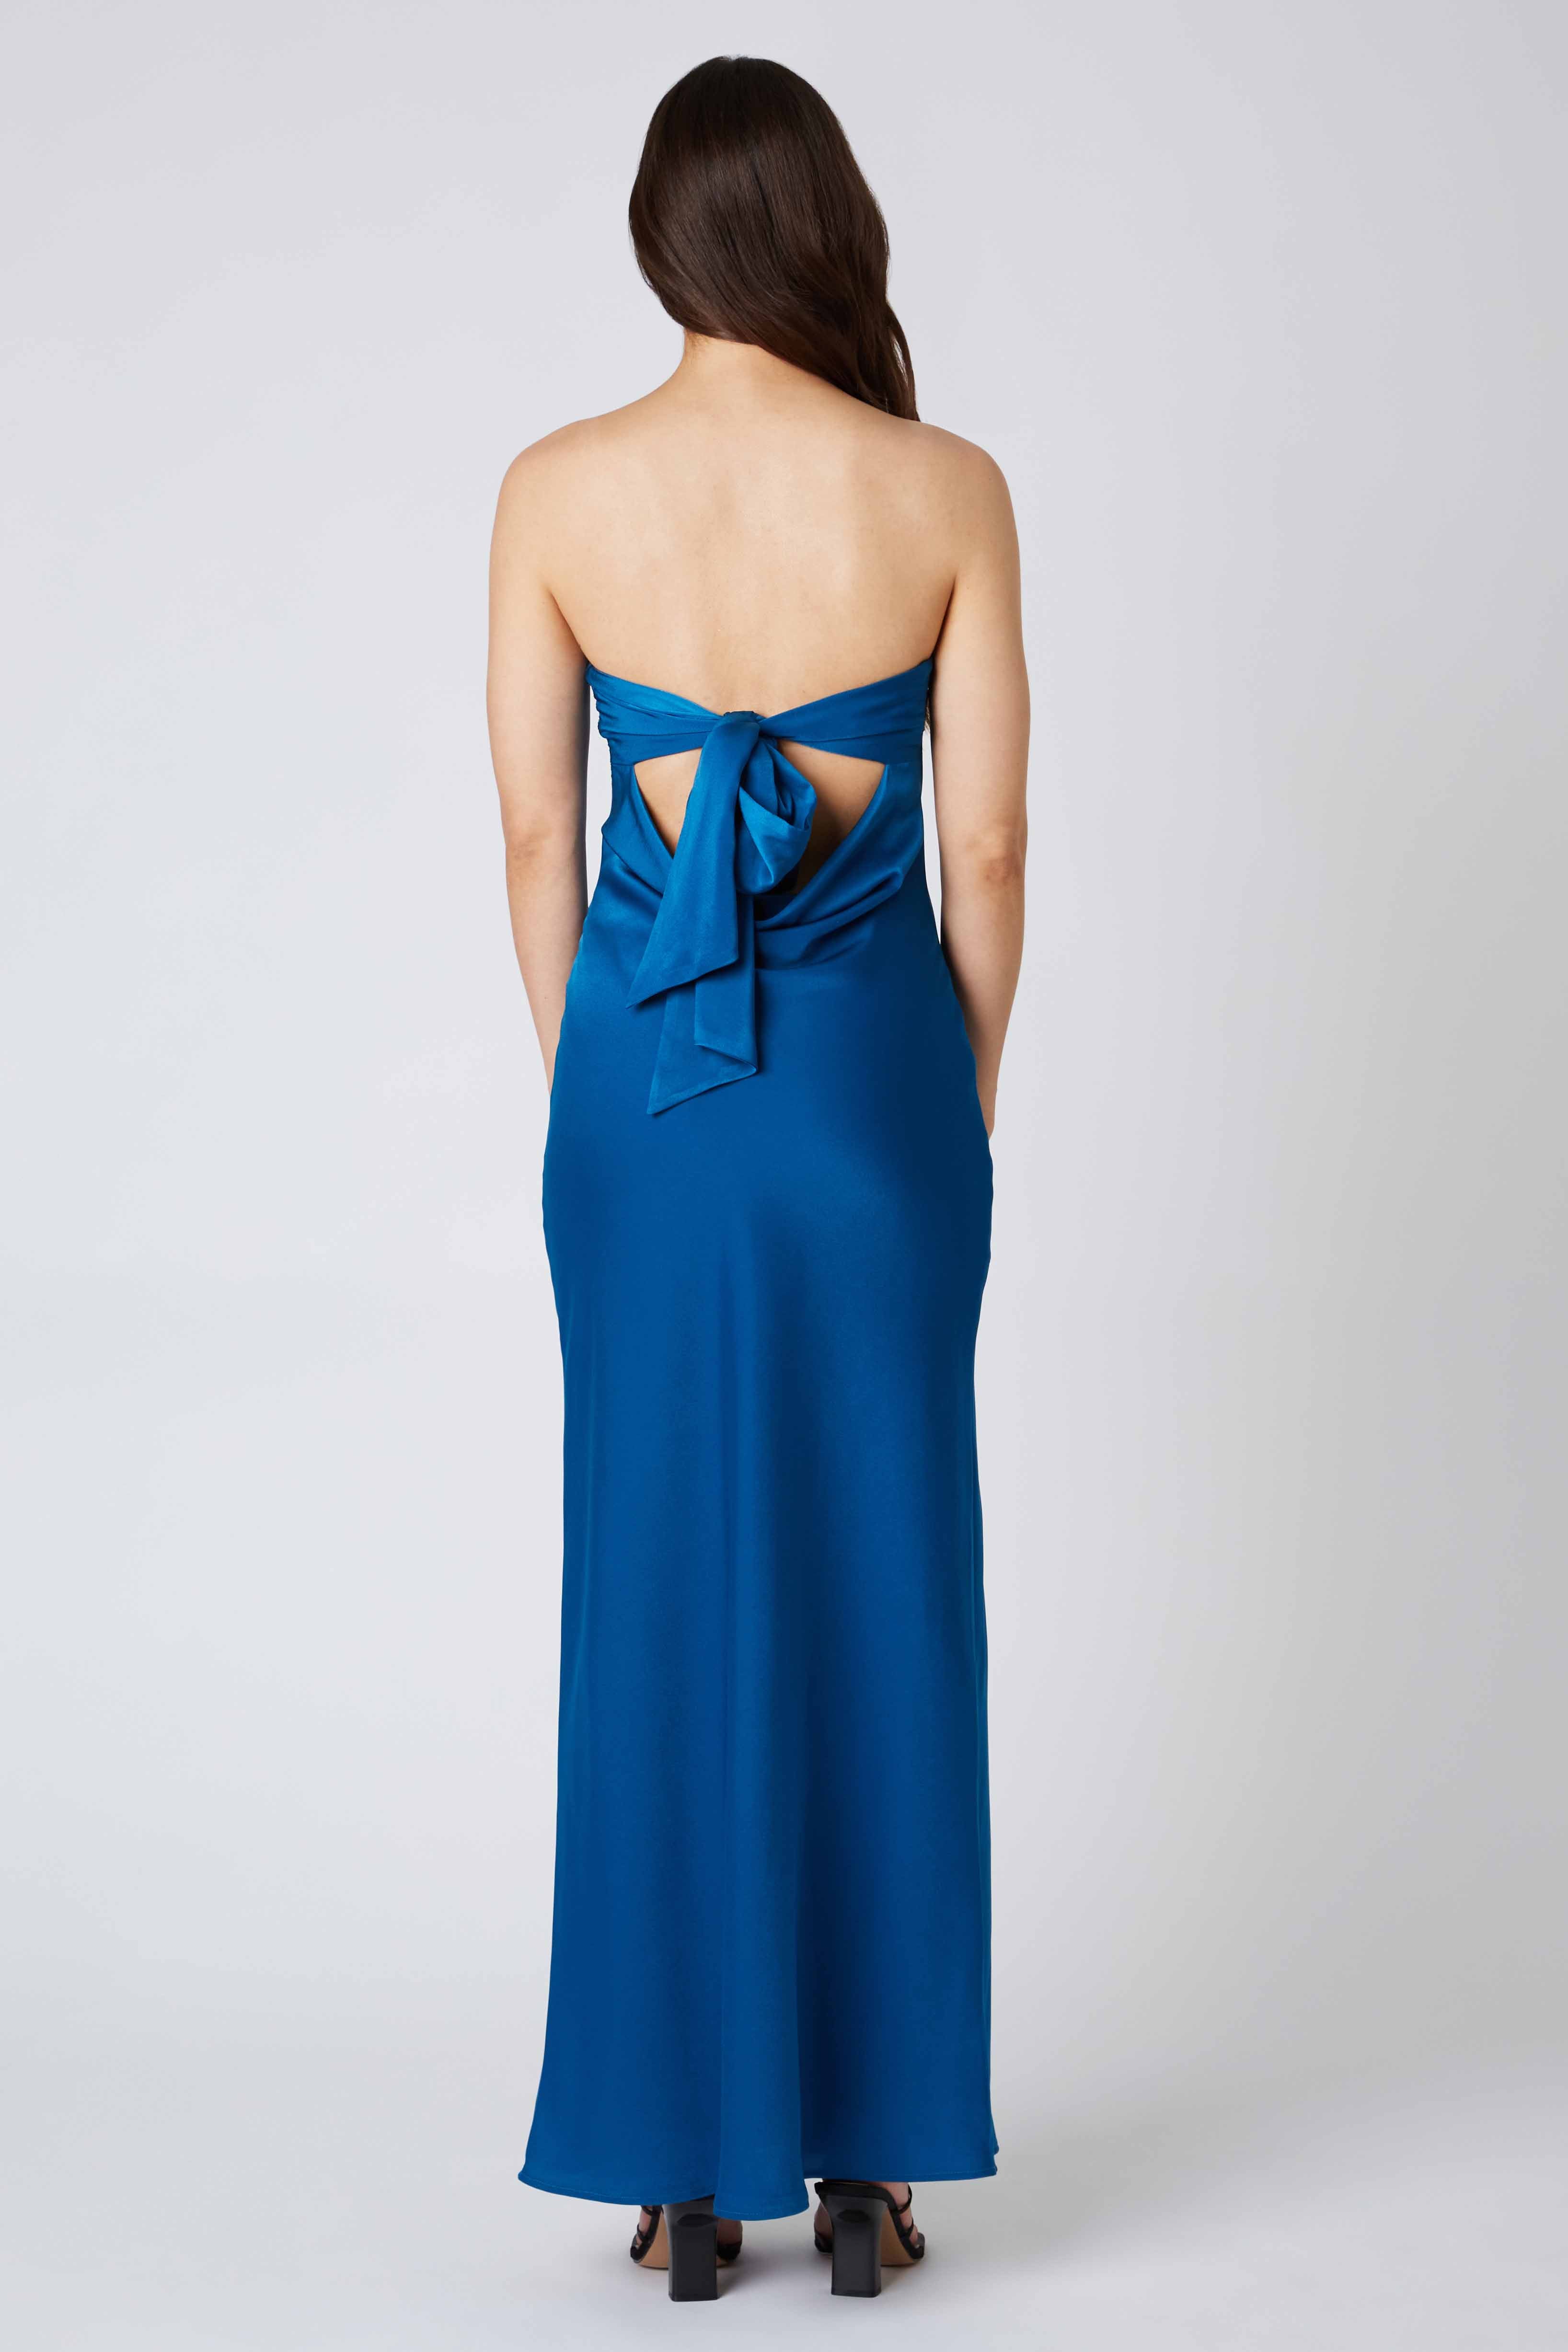 Tie-Back Strapless Maxi Dress in Teal Blue Back View